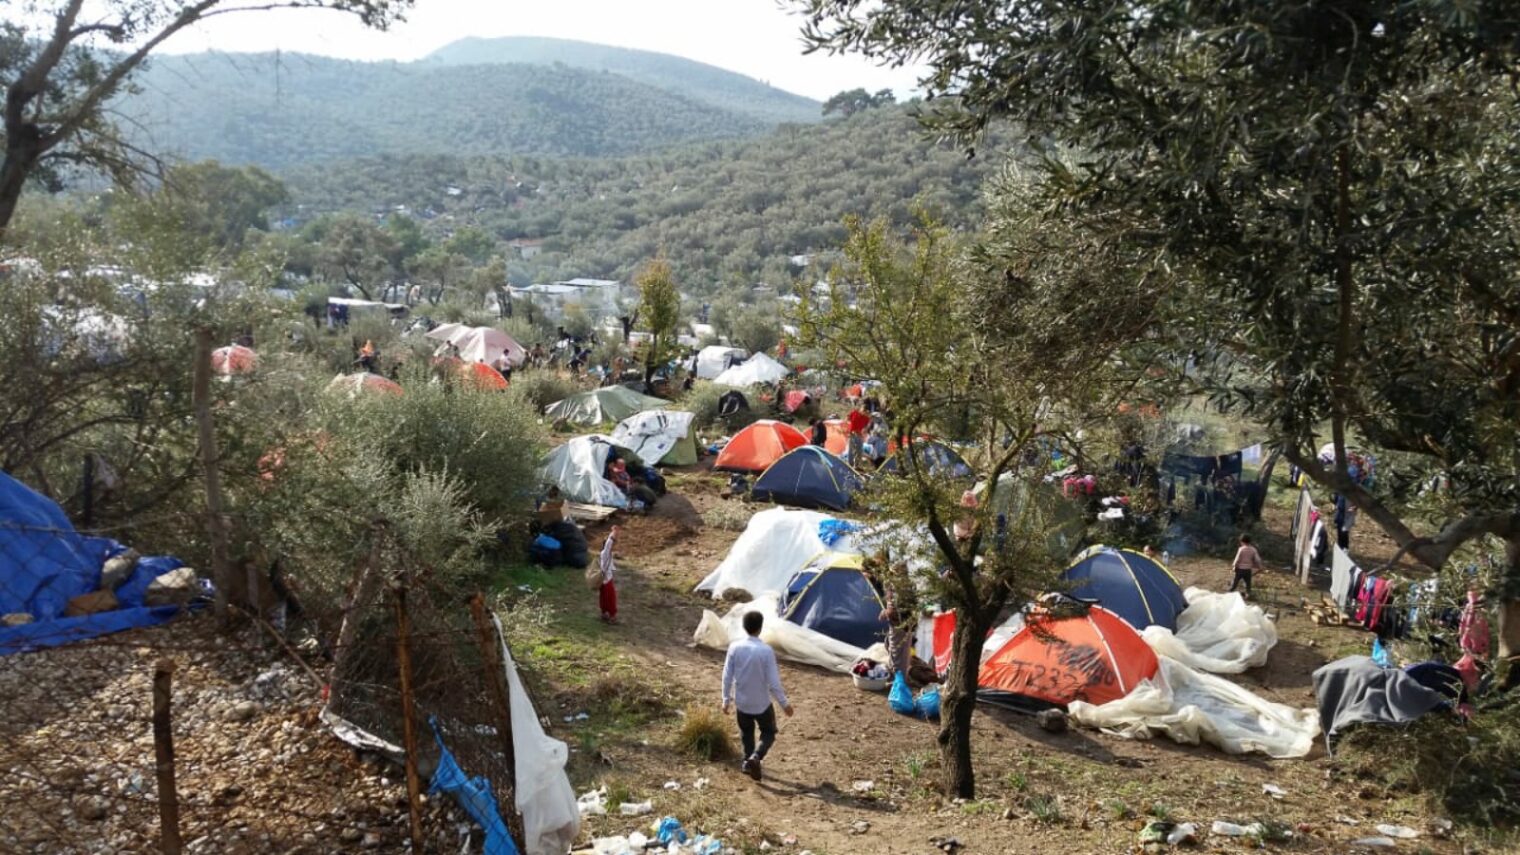 The Moria refugee camp in Lesbos, Greece, prior to the September 2020 fires. Photo courtesy of IsraAID